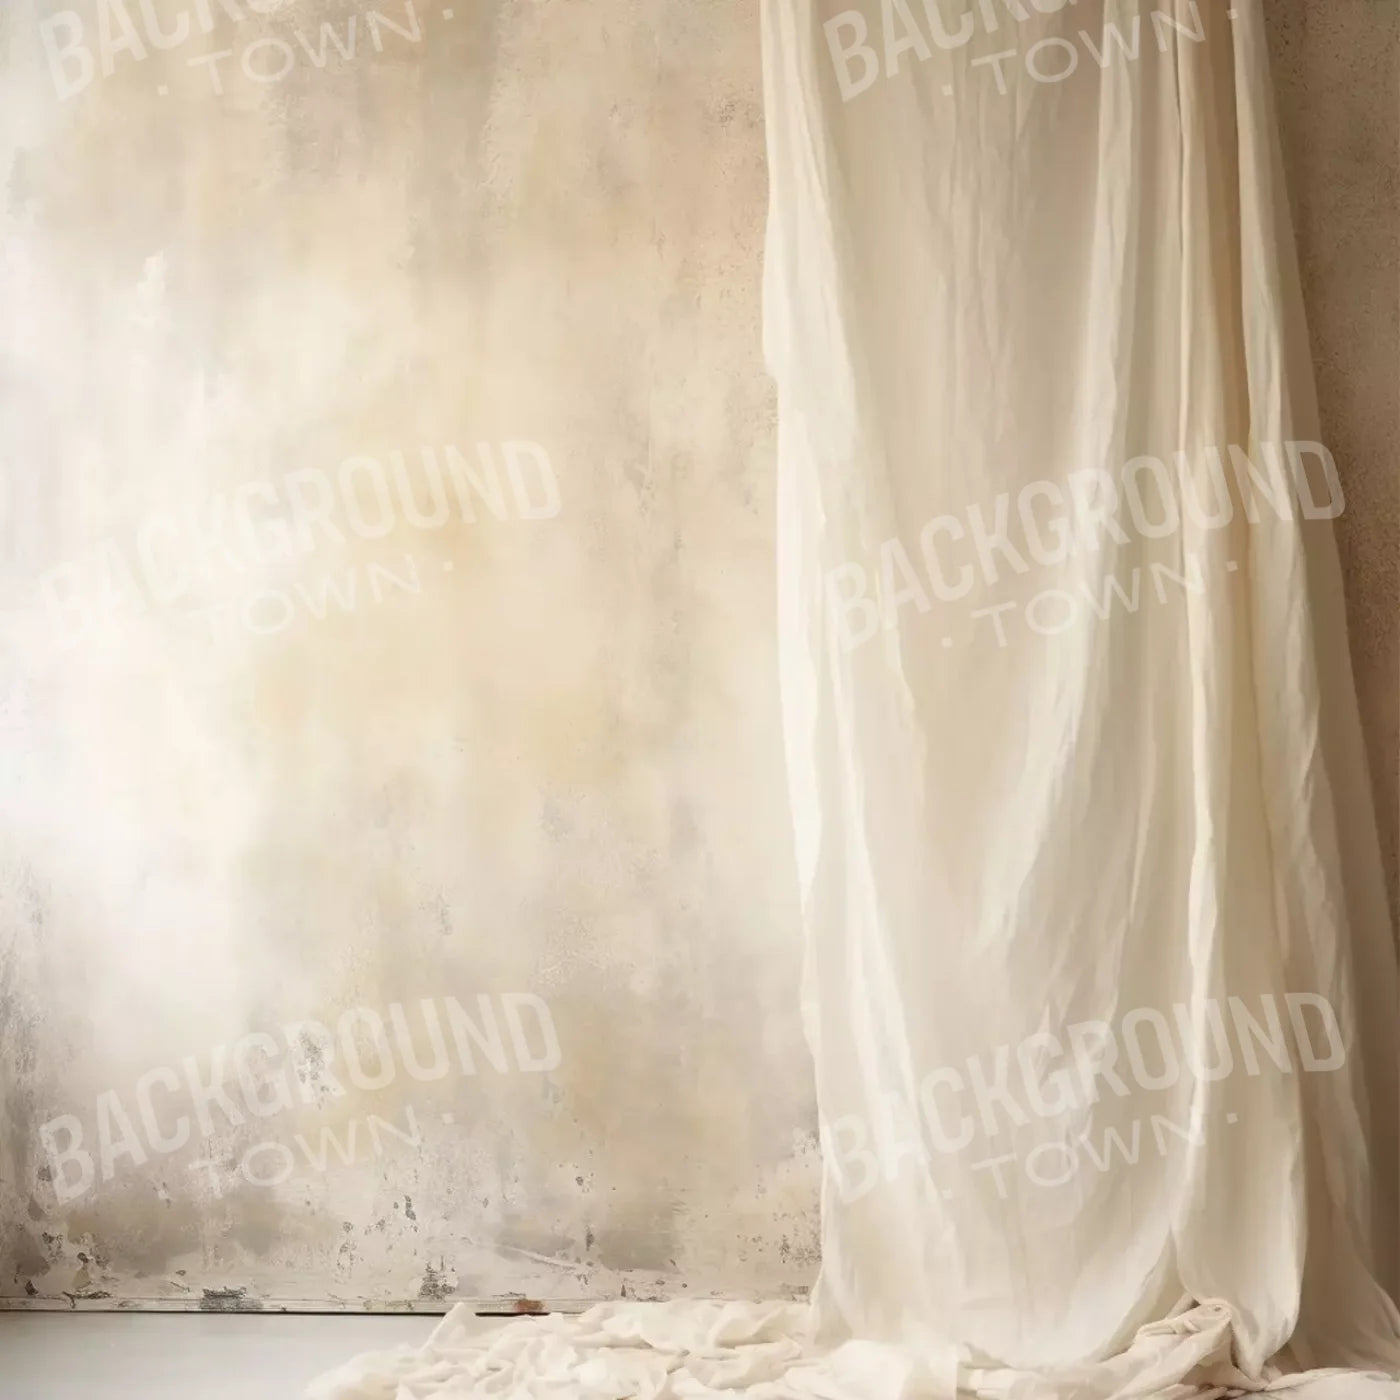 Plaster Wall With Curtain I 8X8 Fleece ( 96 X Inch ) Backdrop